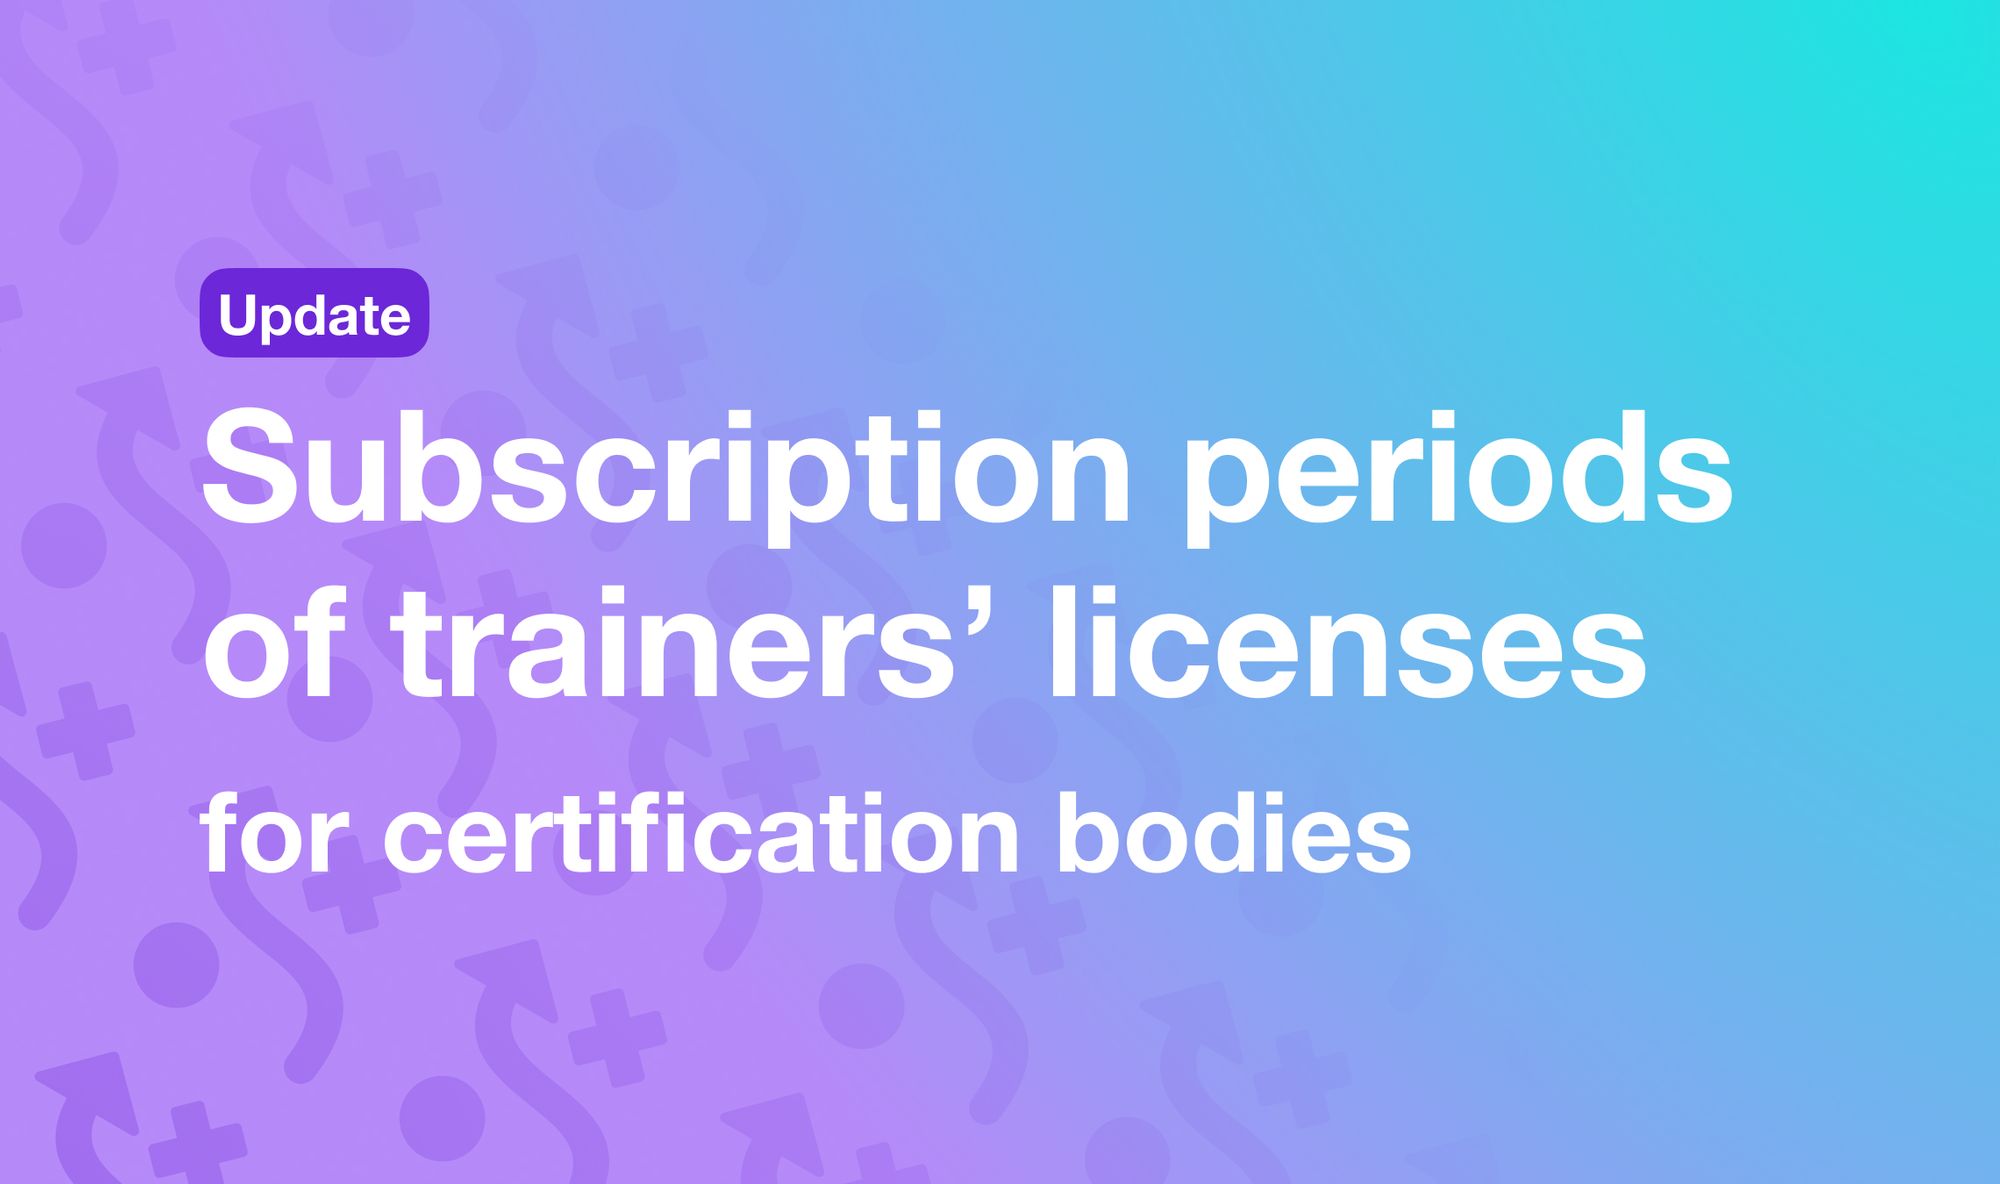 Subscription periods of trainers’ licenses for certification bodies